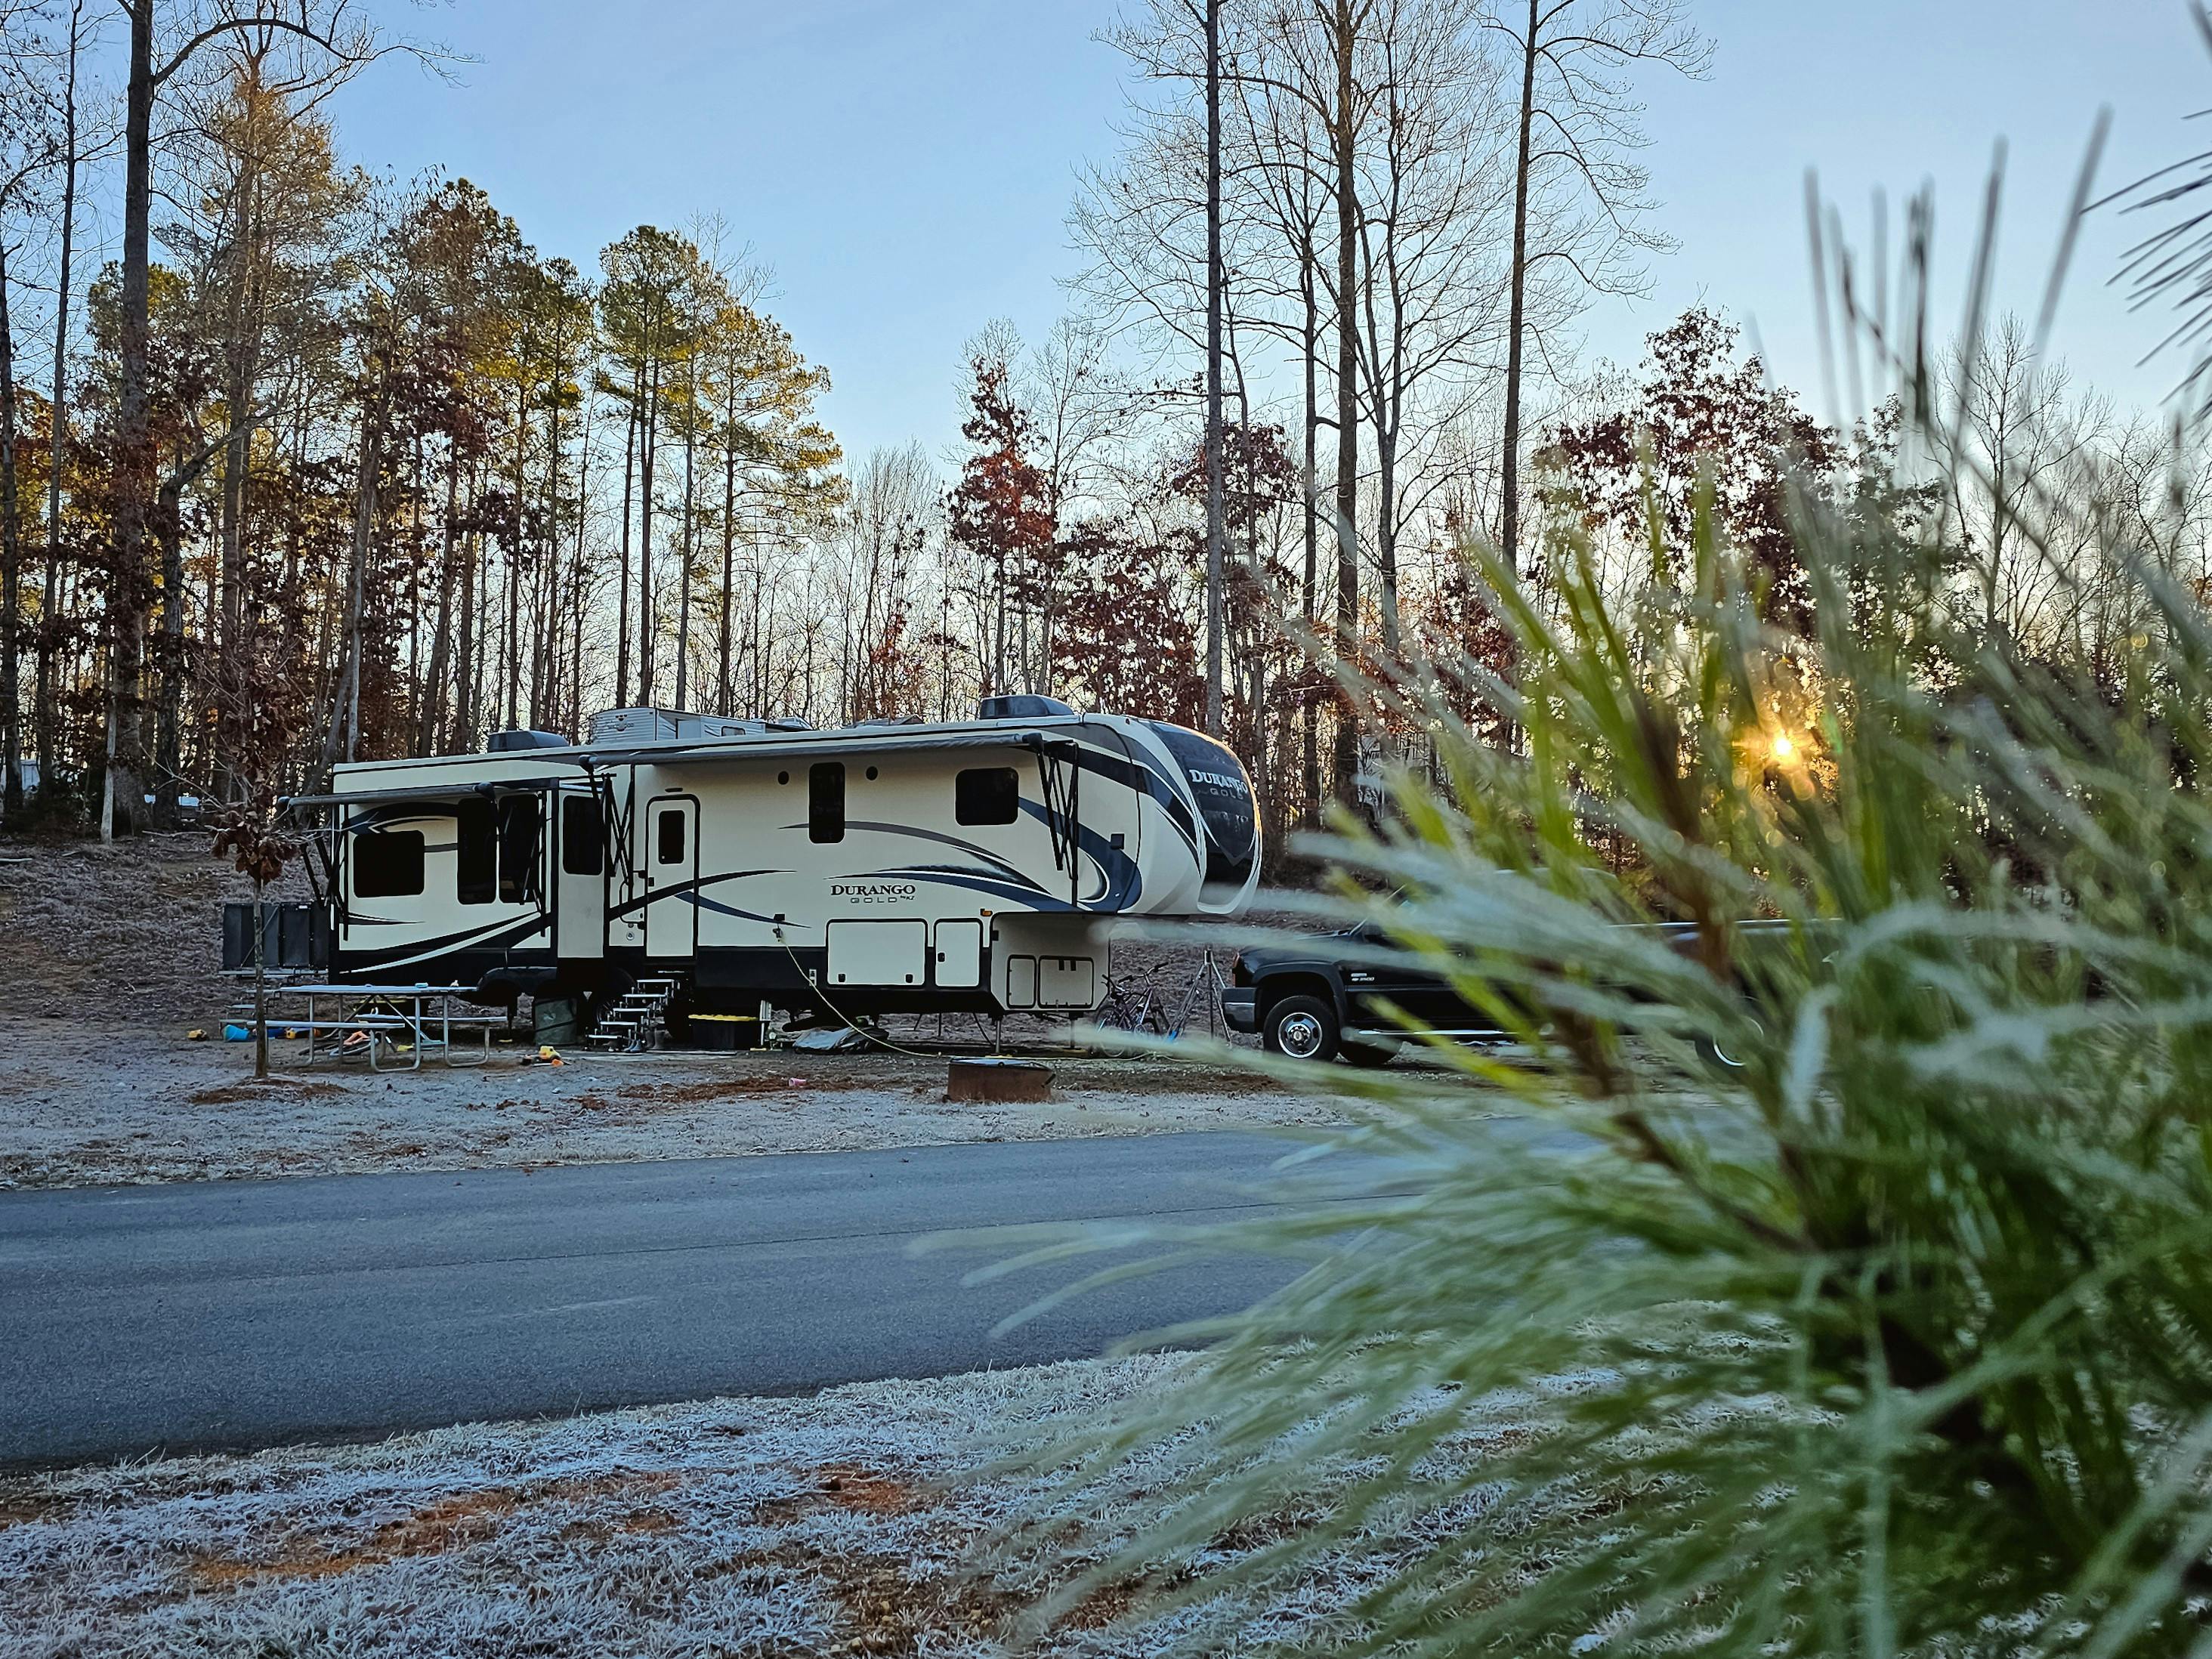 Bibi and JC Barringer's KZ Durango Gold parked at a campsite on a crisp morning.